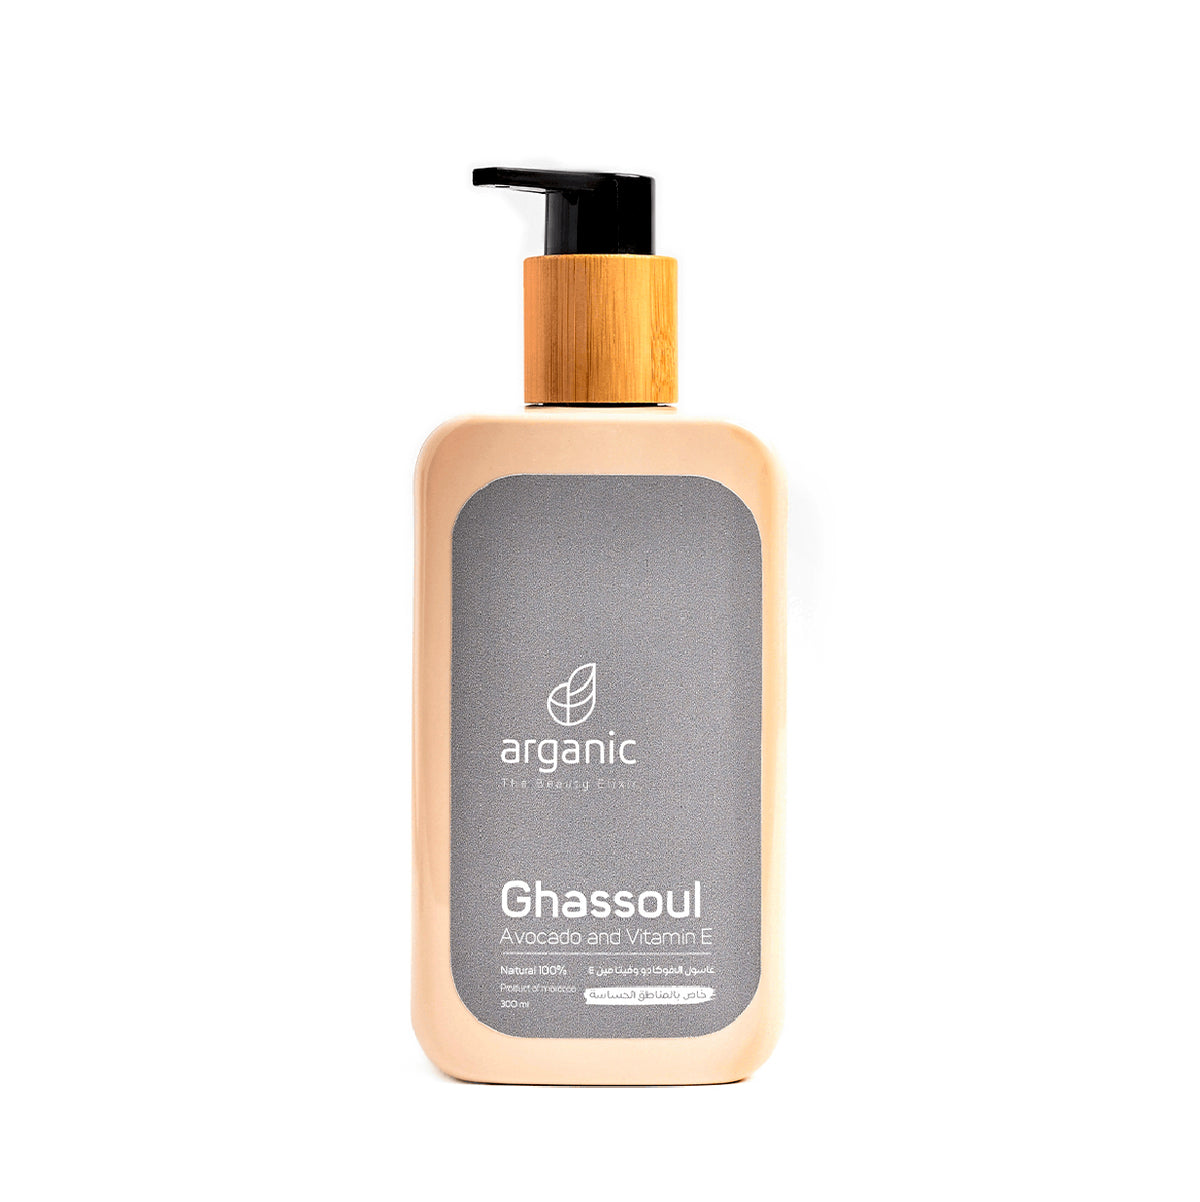 Ghassoul body wash with avocado and vitamin E in beige bottle.